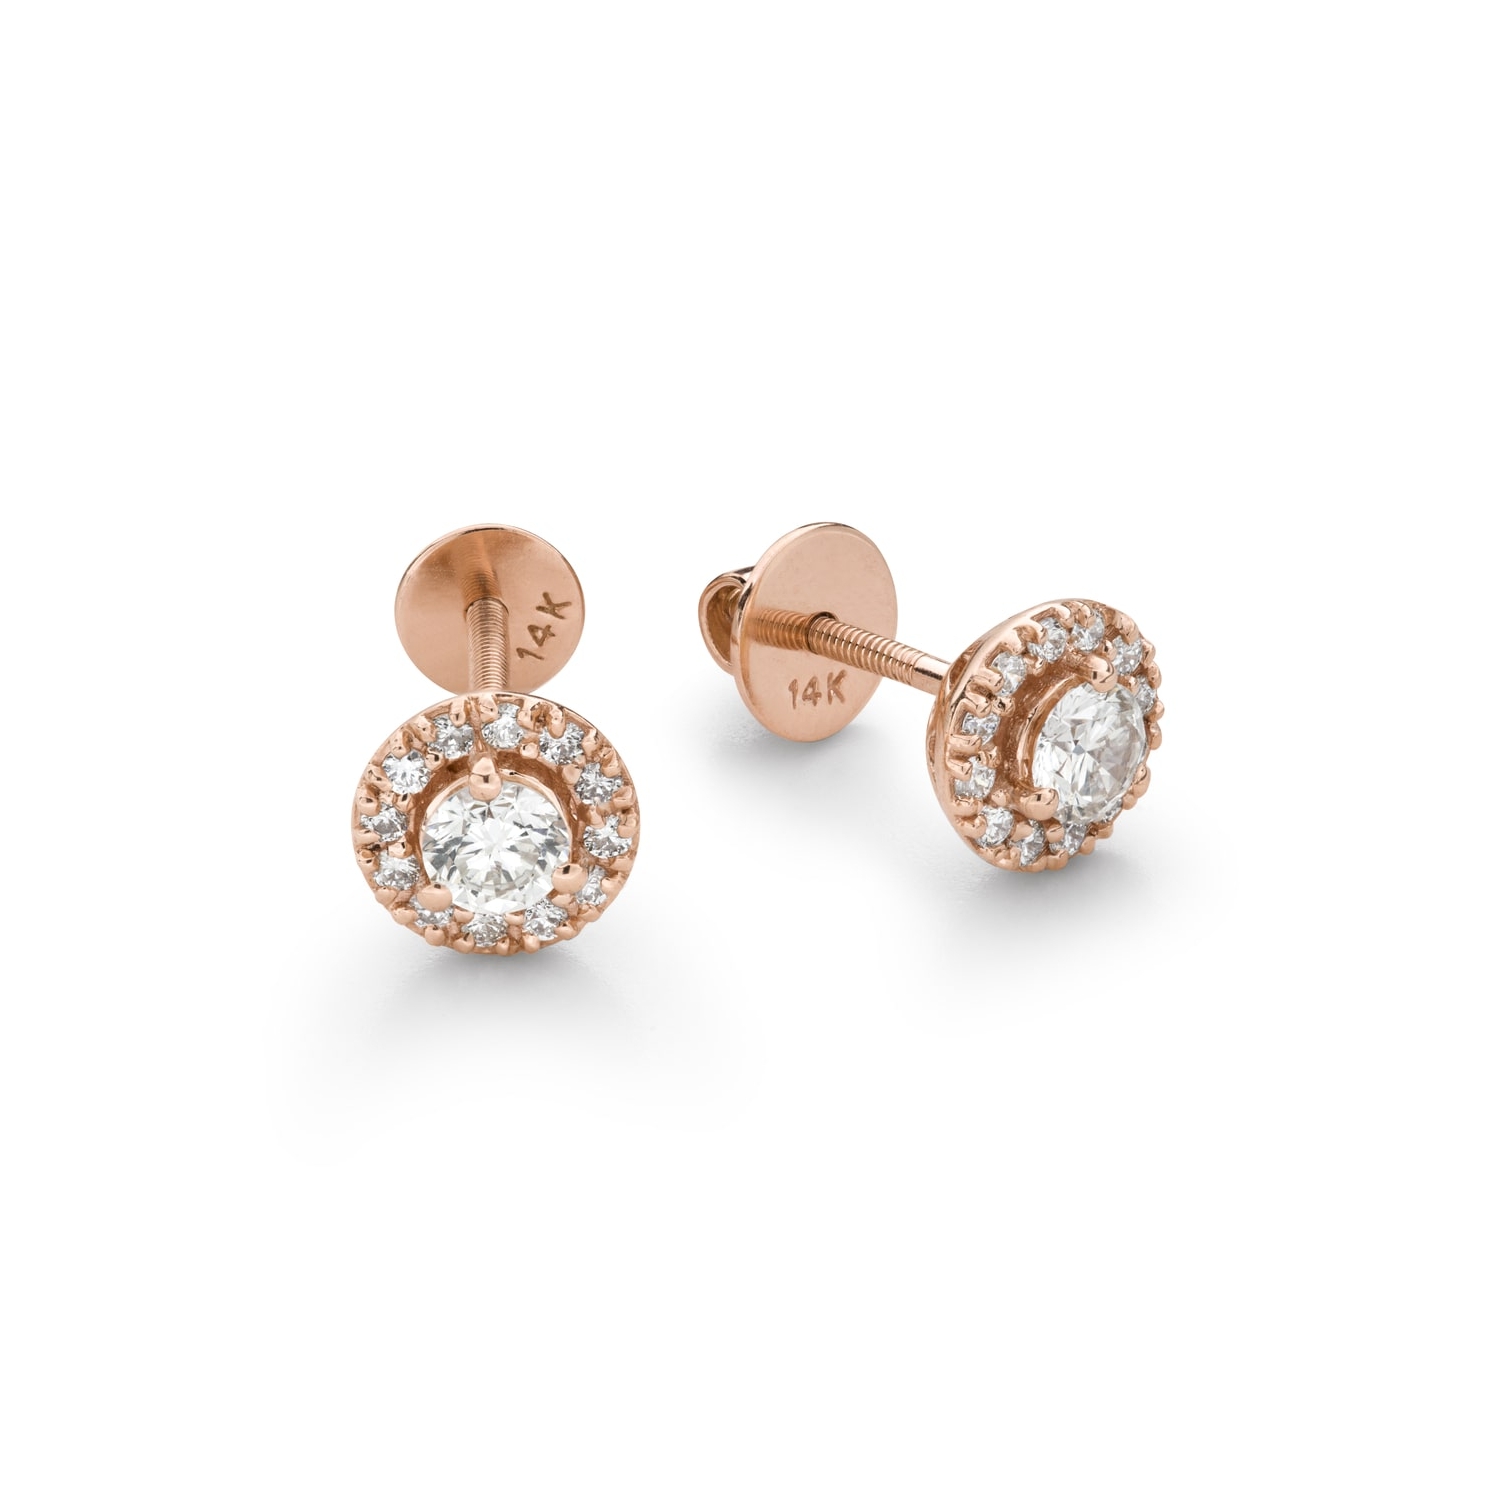 Gold earrings with brilliants "Elegance 31"